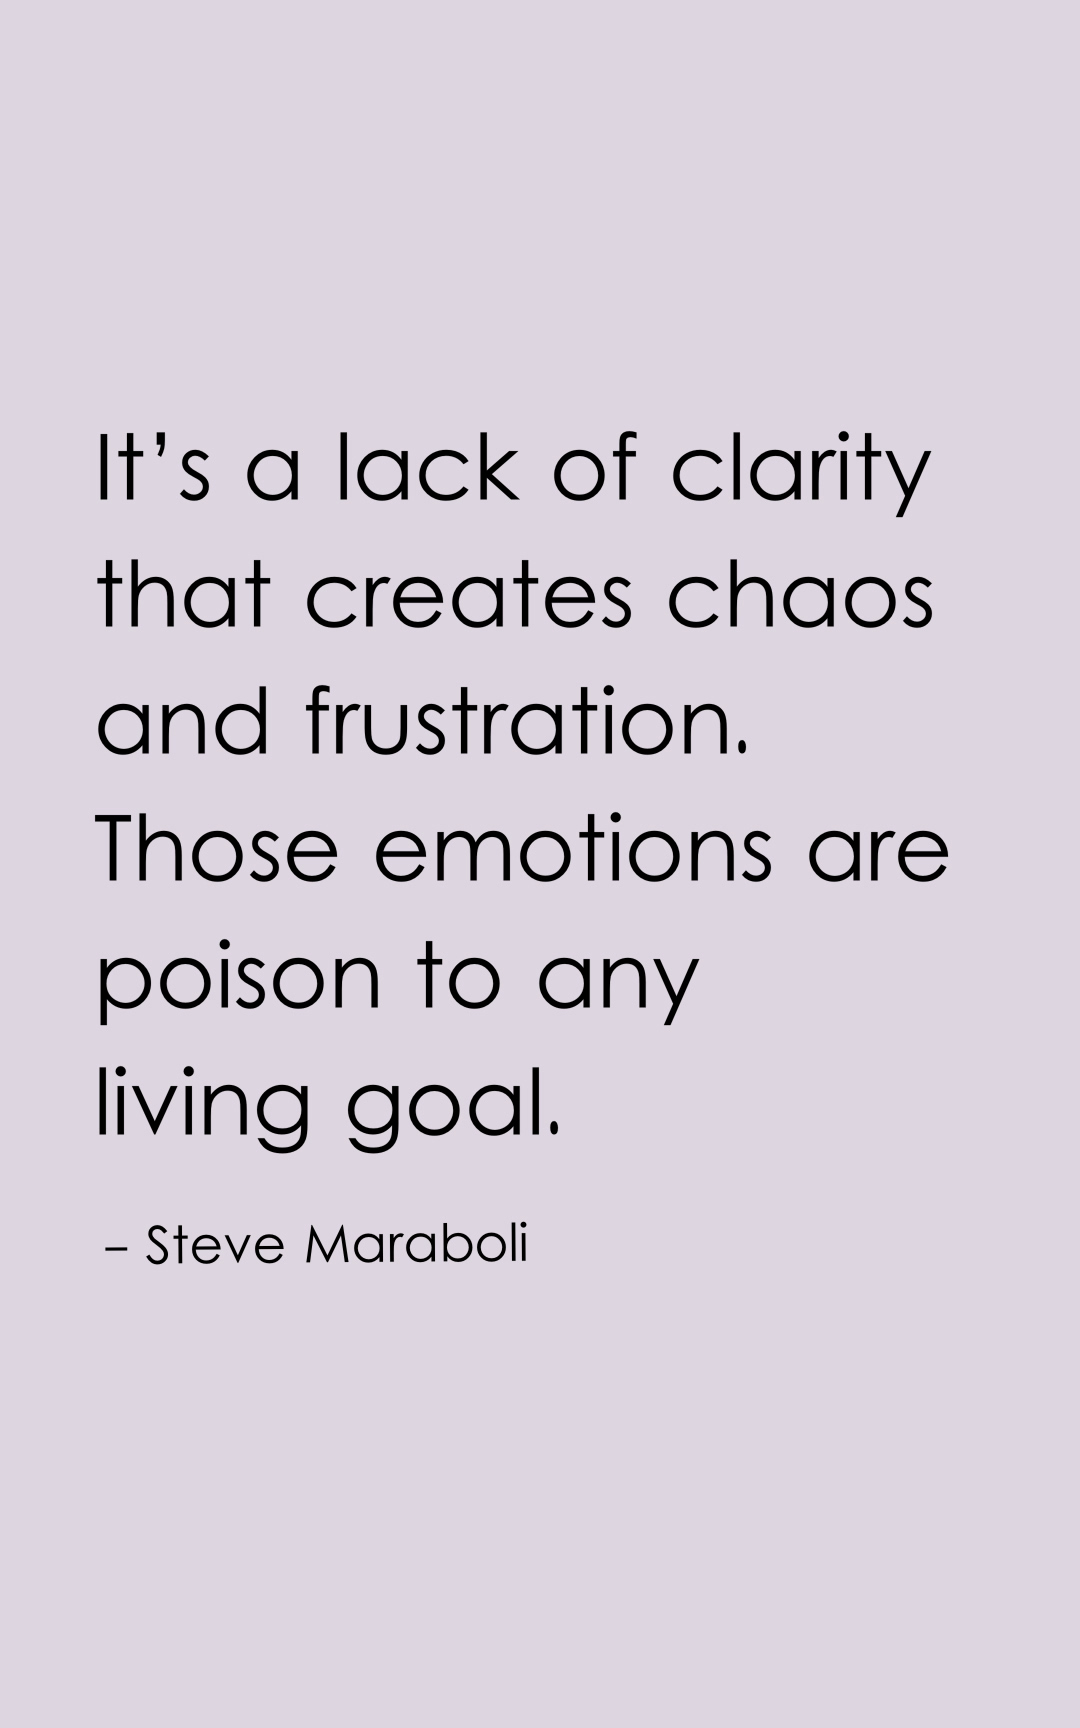 It’s a lack of clarity that creates chaos and frustration. Those emotions are poison to any living goal.